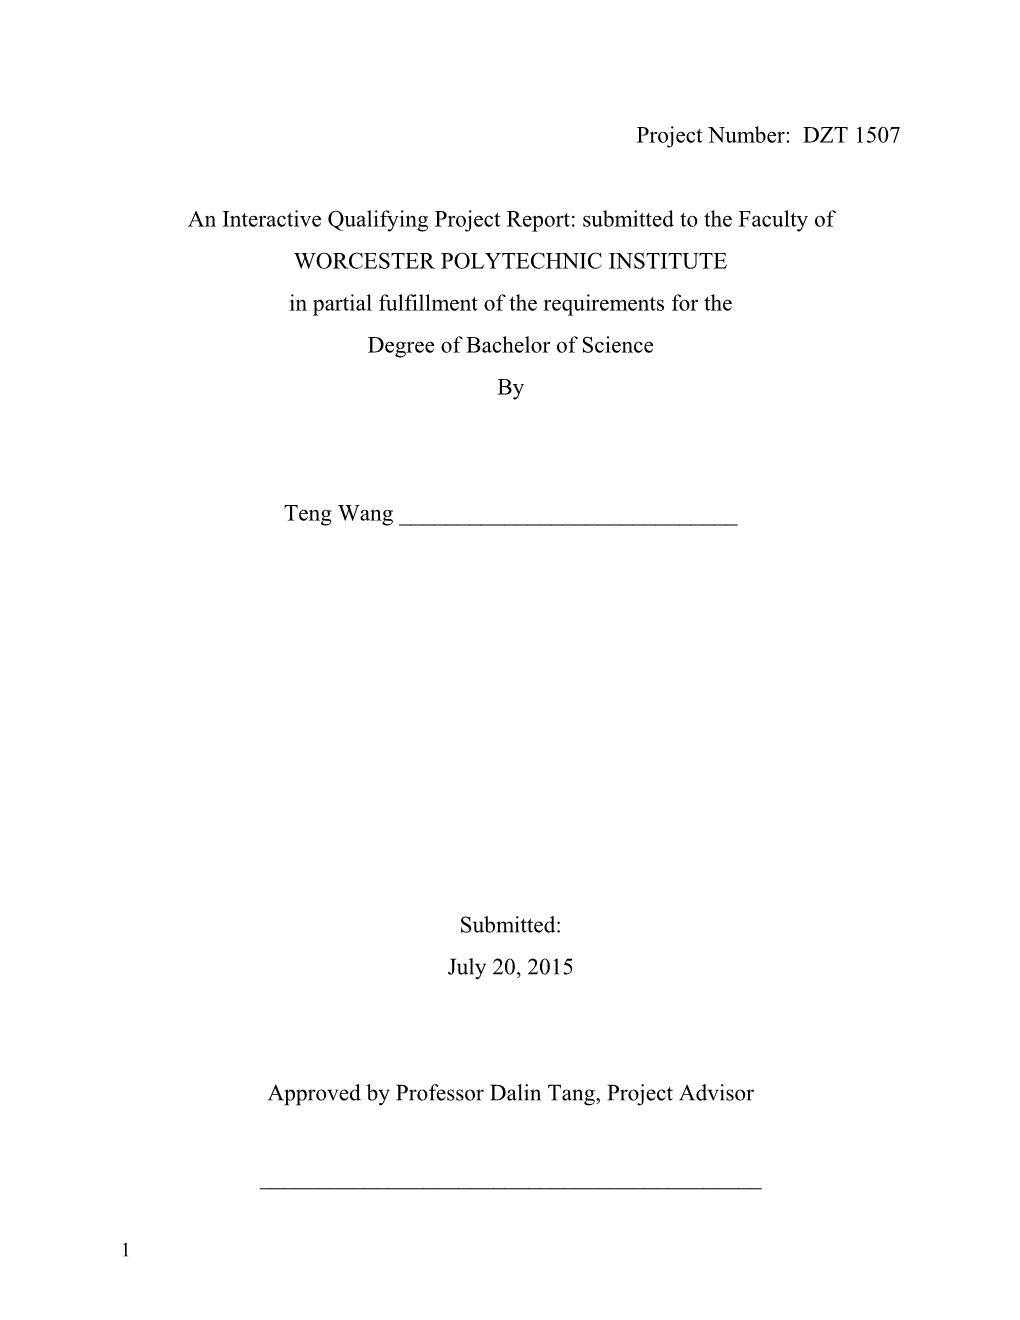 An Interactive Qualifying Project Report: Submitted to the Faculty Of